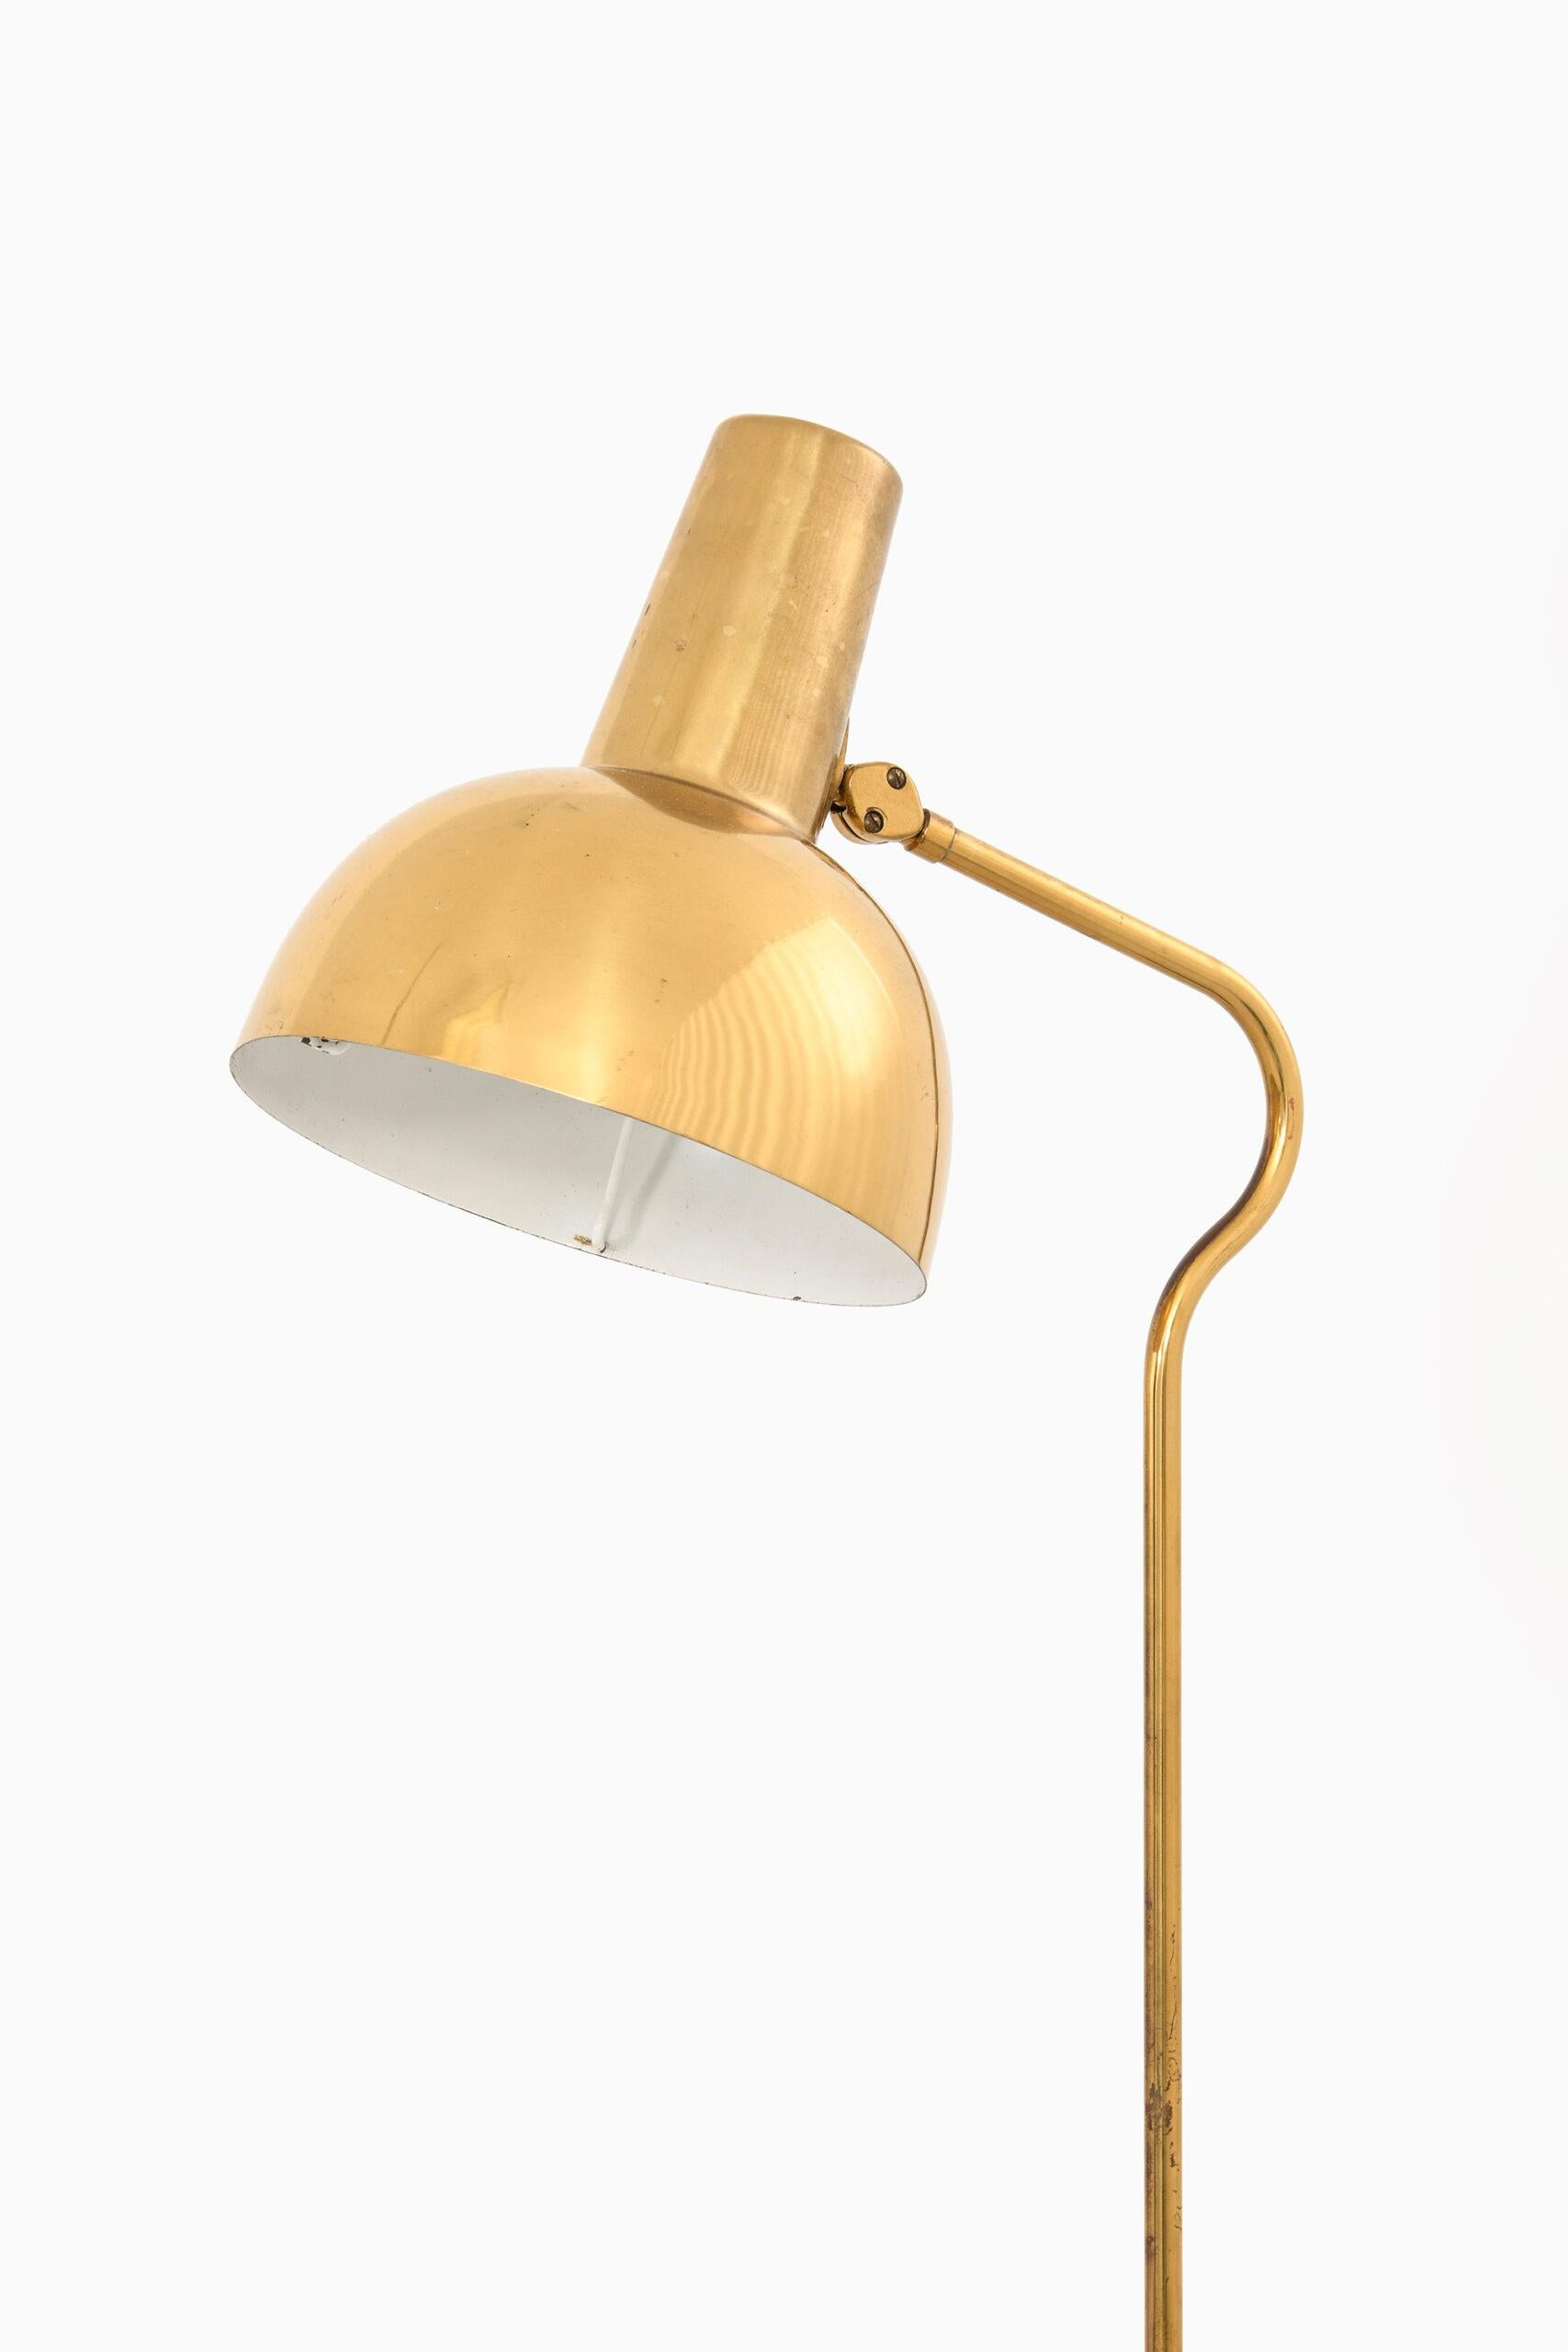 Rare floor lamp by unknown designer. Produced by ASEA in Sweden.